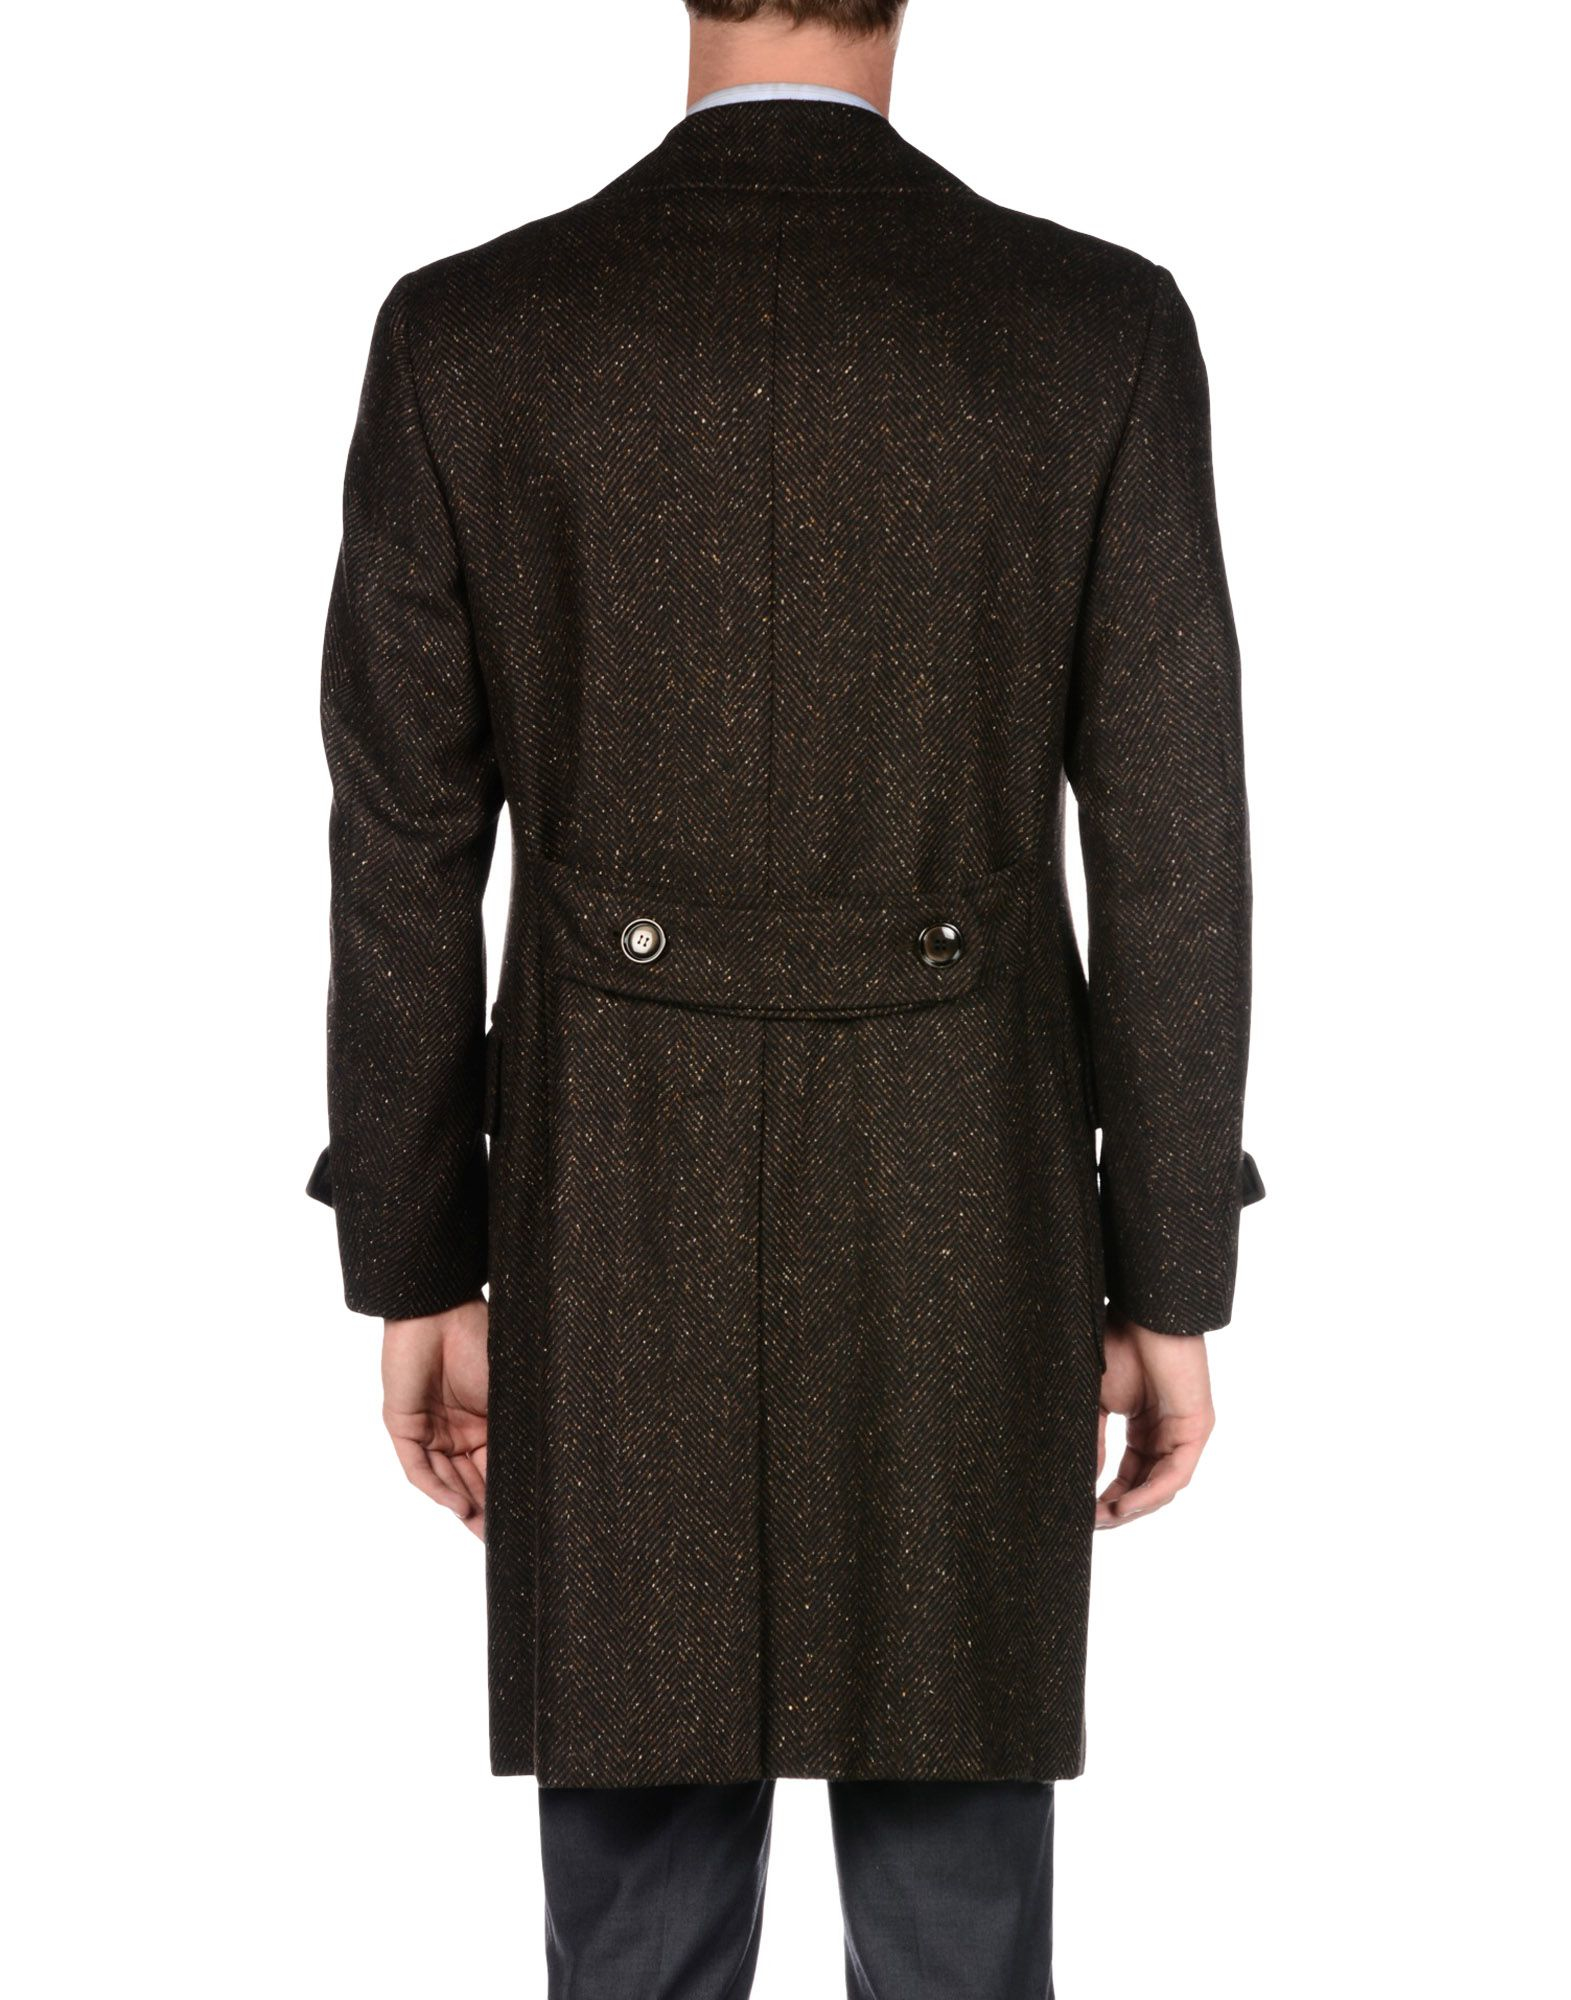 Lyst - Canali Coat in Brown for Men